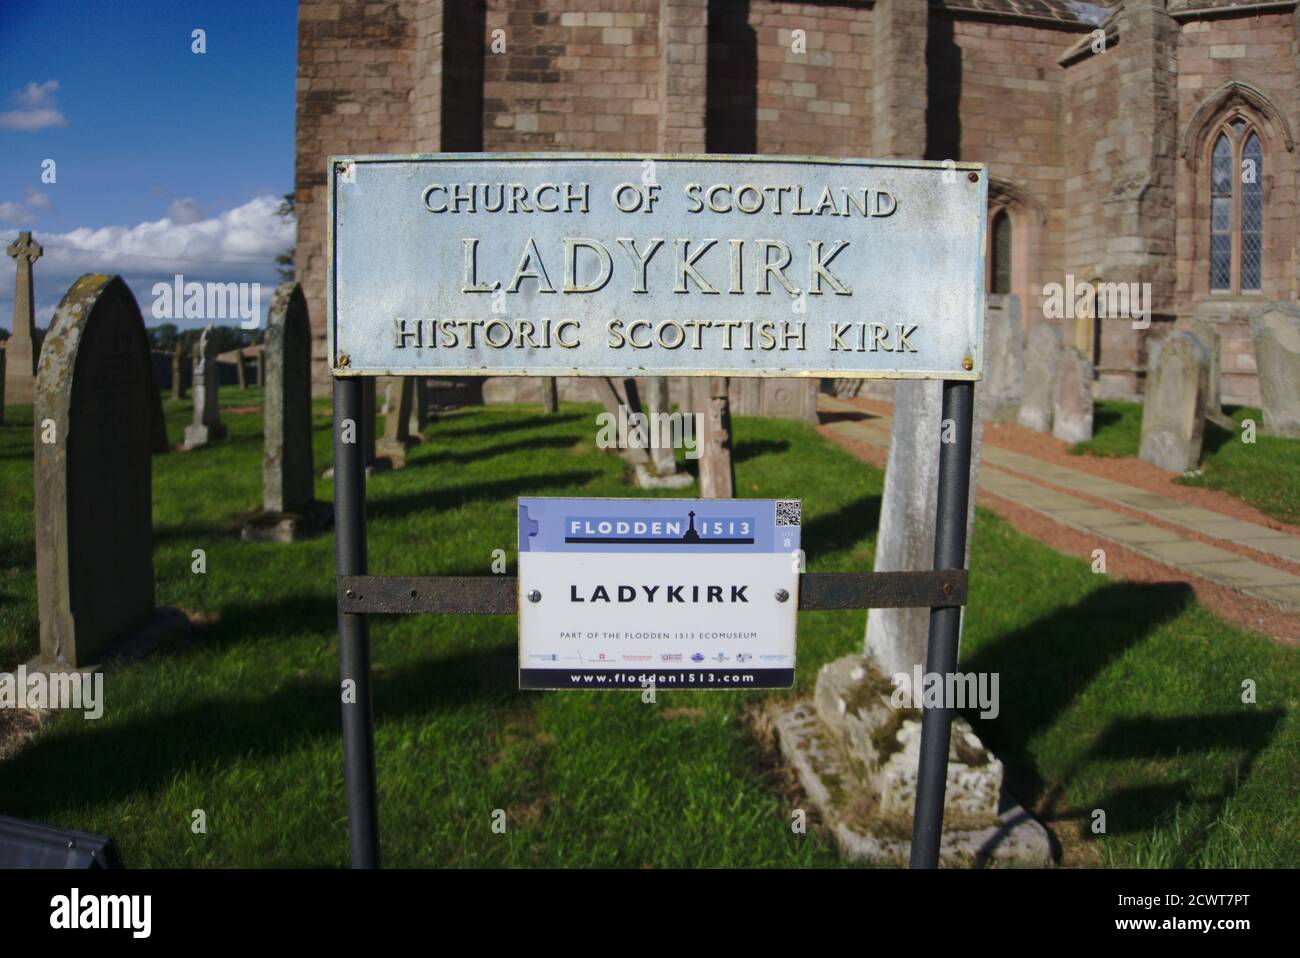 Two signs together explaining that Ladykirk Church, near the River Tweed in Berwickshire, Scottish Borders, is part of the Flodden 1513 Ecomuseum. Stock Photo